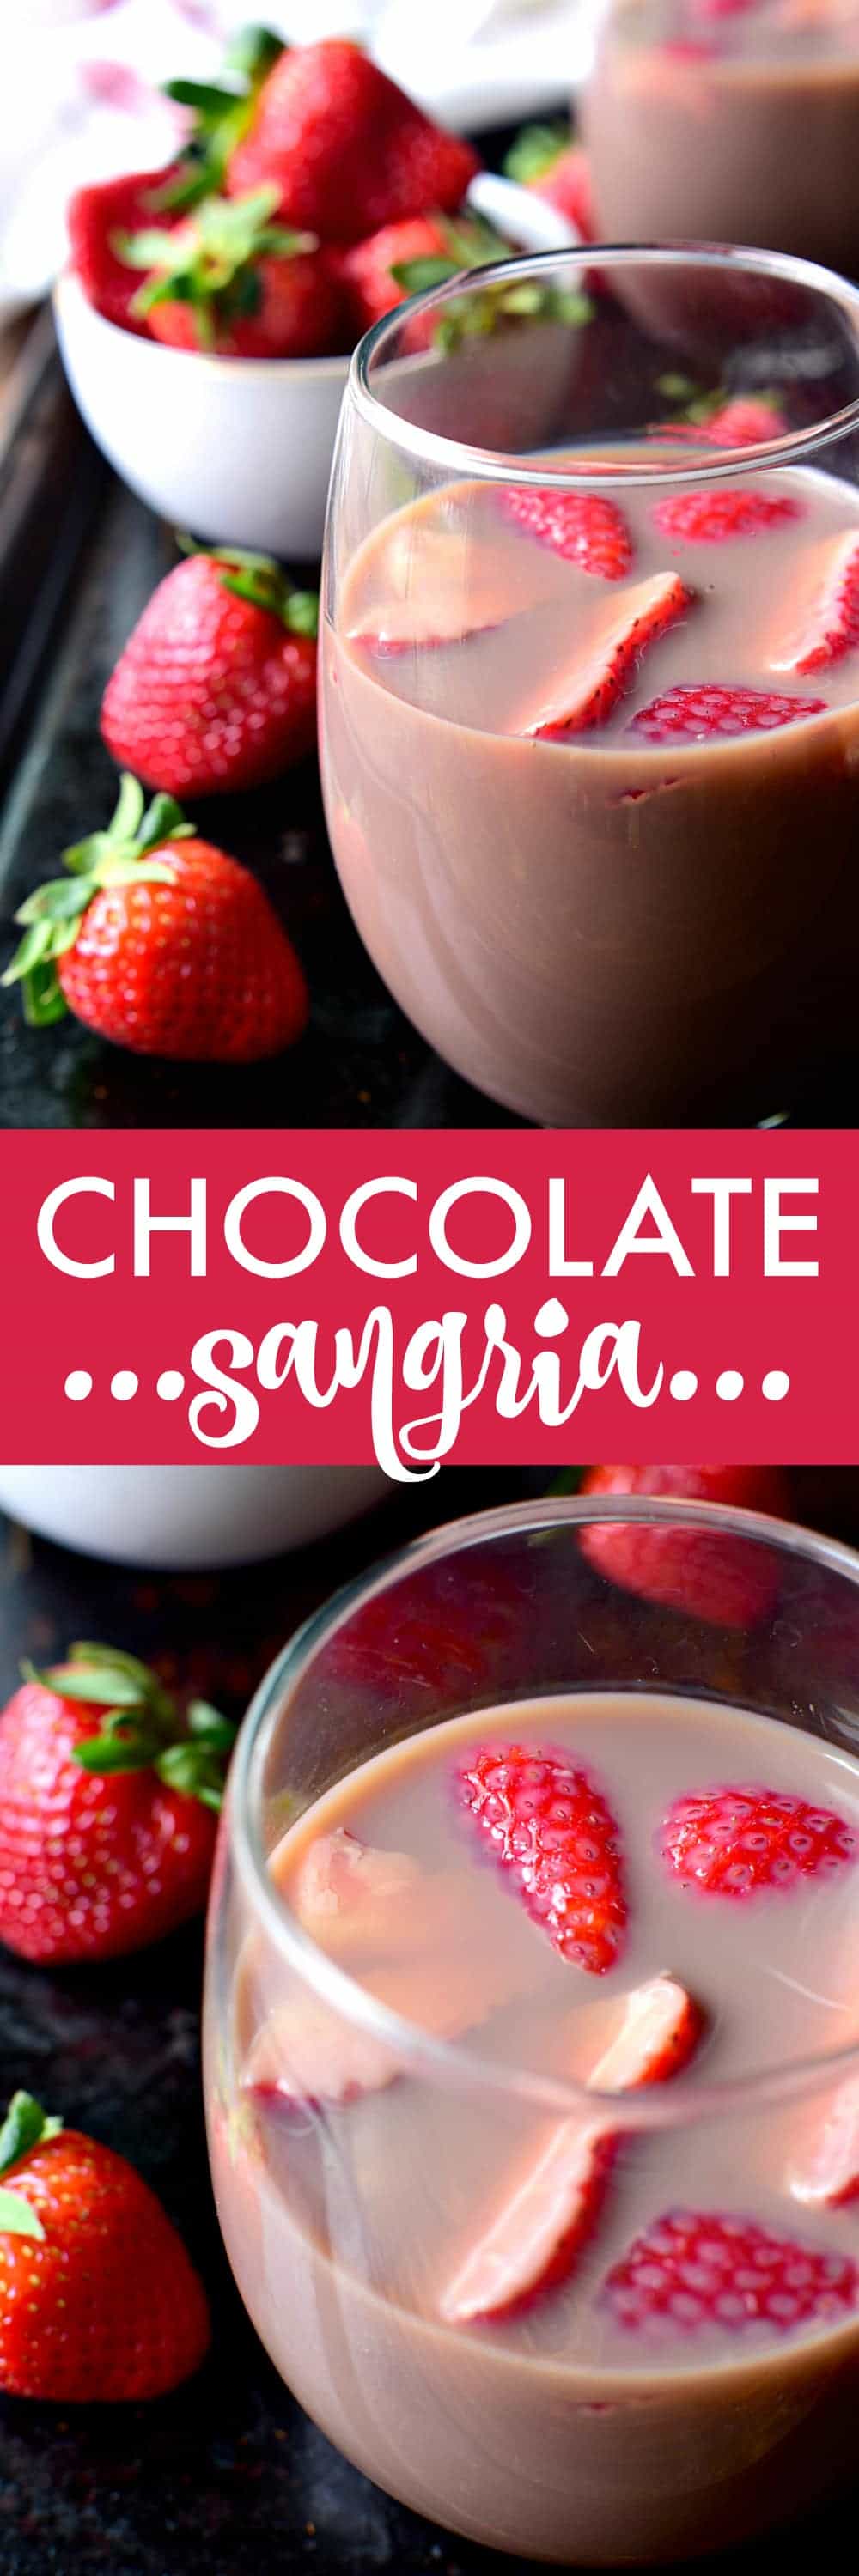 Chocolate Sangria - made with just 3 ingredients and garnished with fresh strawberries! This sangria is the ultimate rich, creamy, chocolatey cocktail....perfect for Valentine's Day or just because